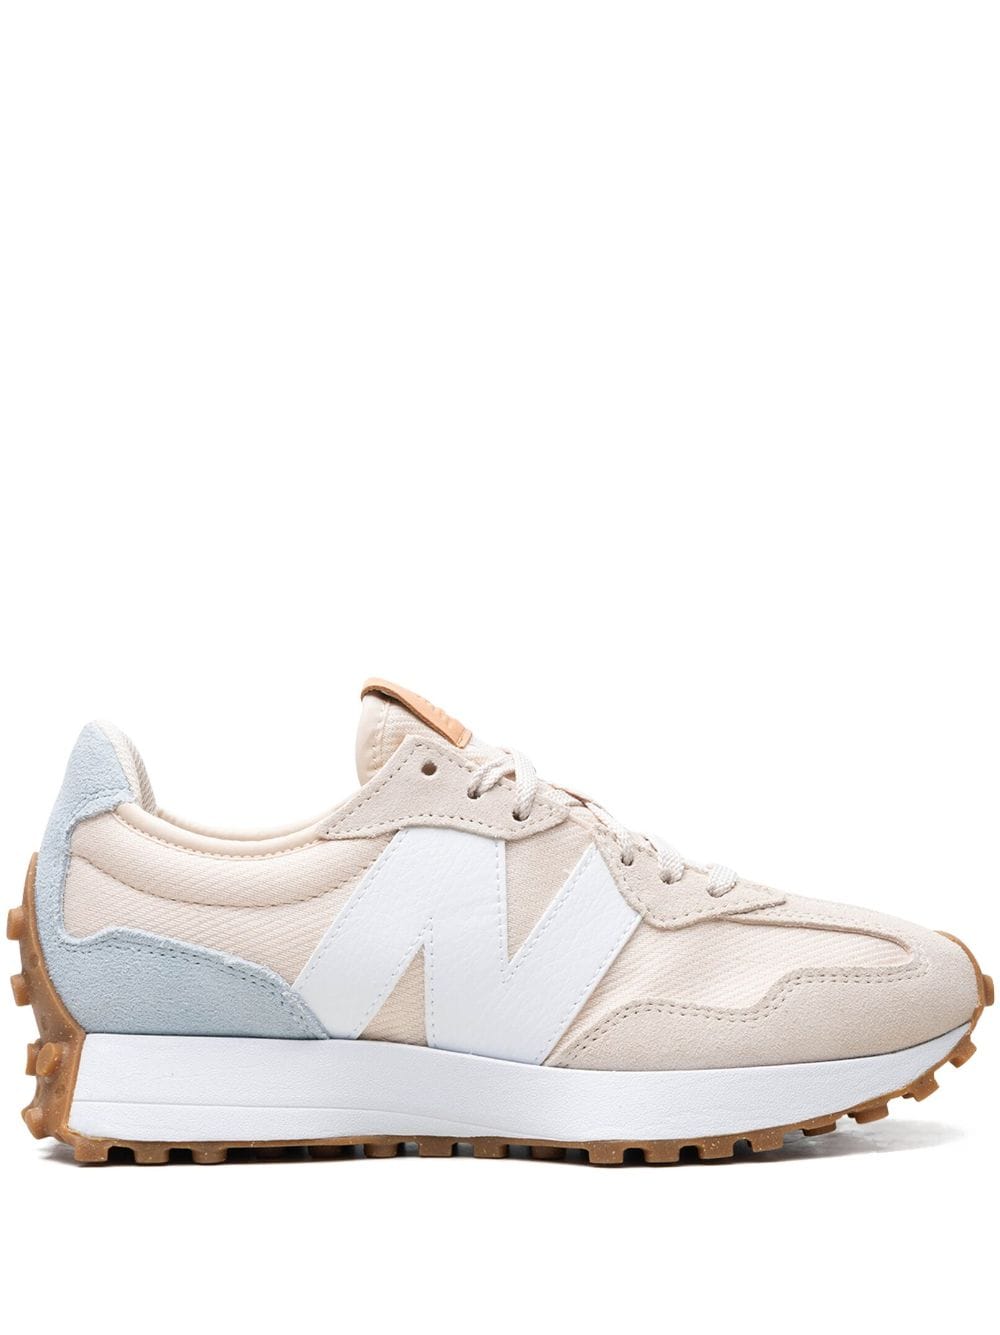 New Balance 327 "Calm Taupe/Morning Fog" sneakers - Pink